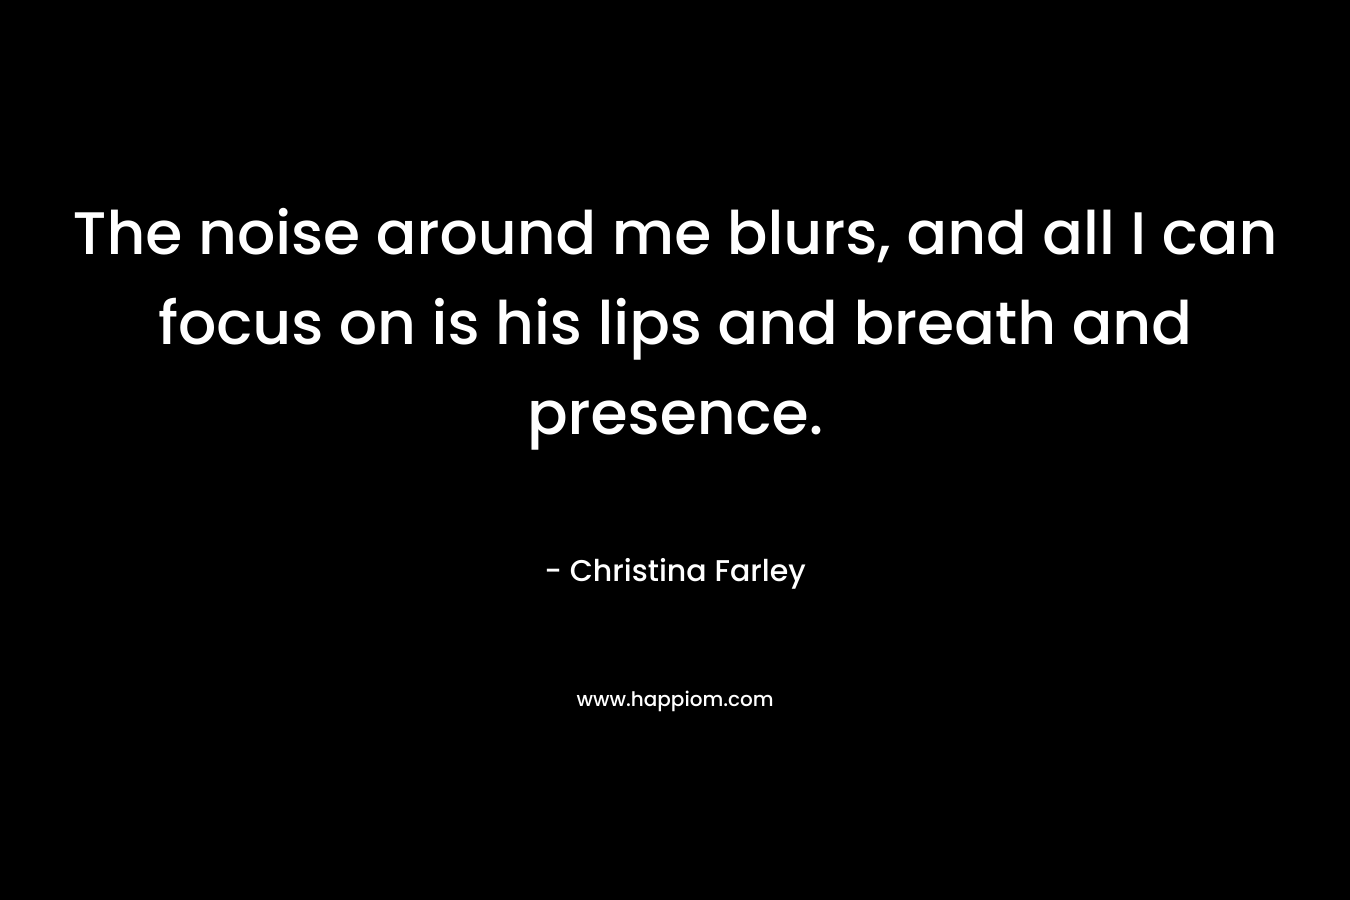 The noise around me blurs, and all I can focus on is his lips and breath and presence.